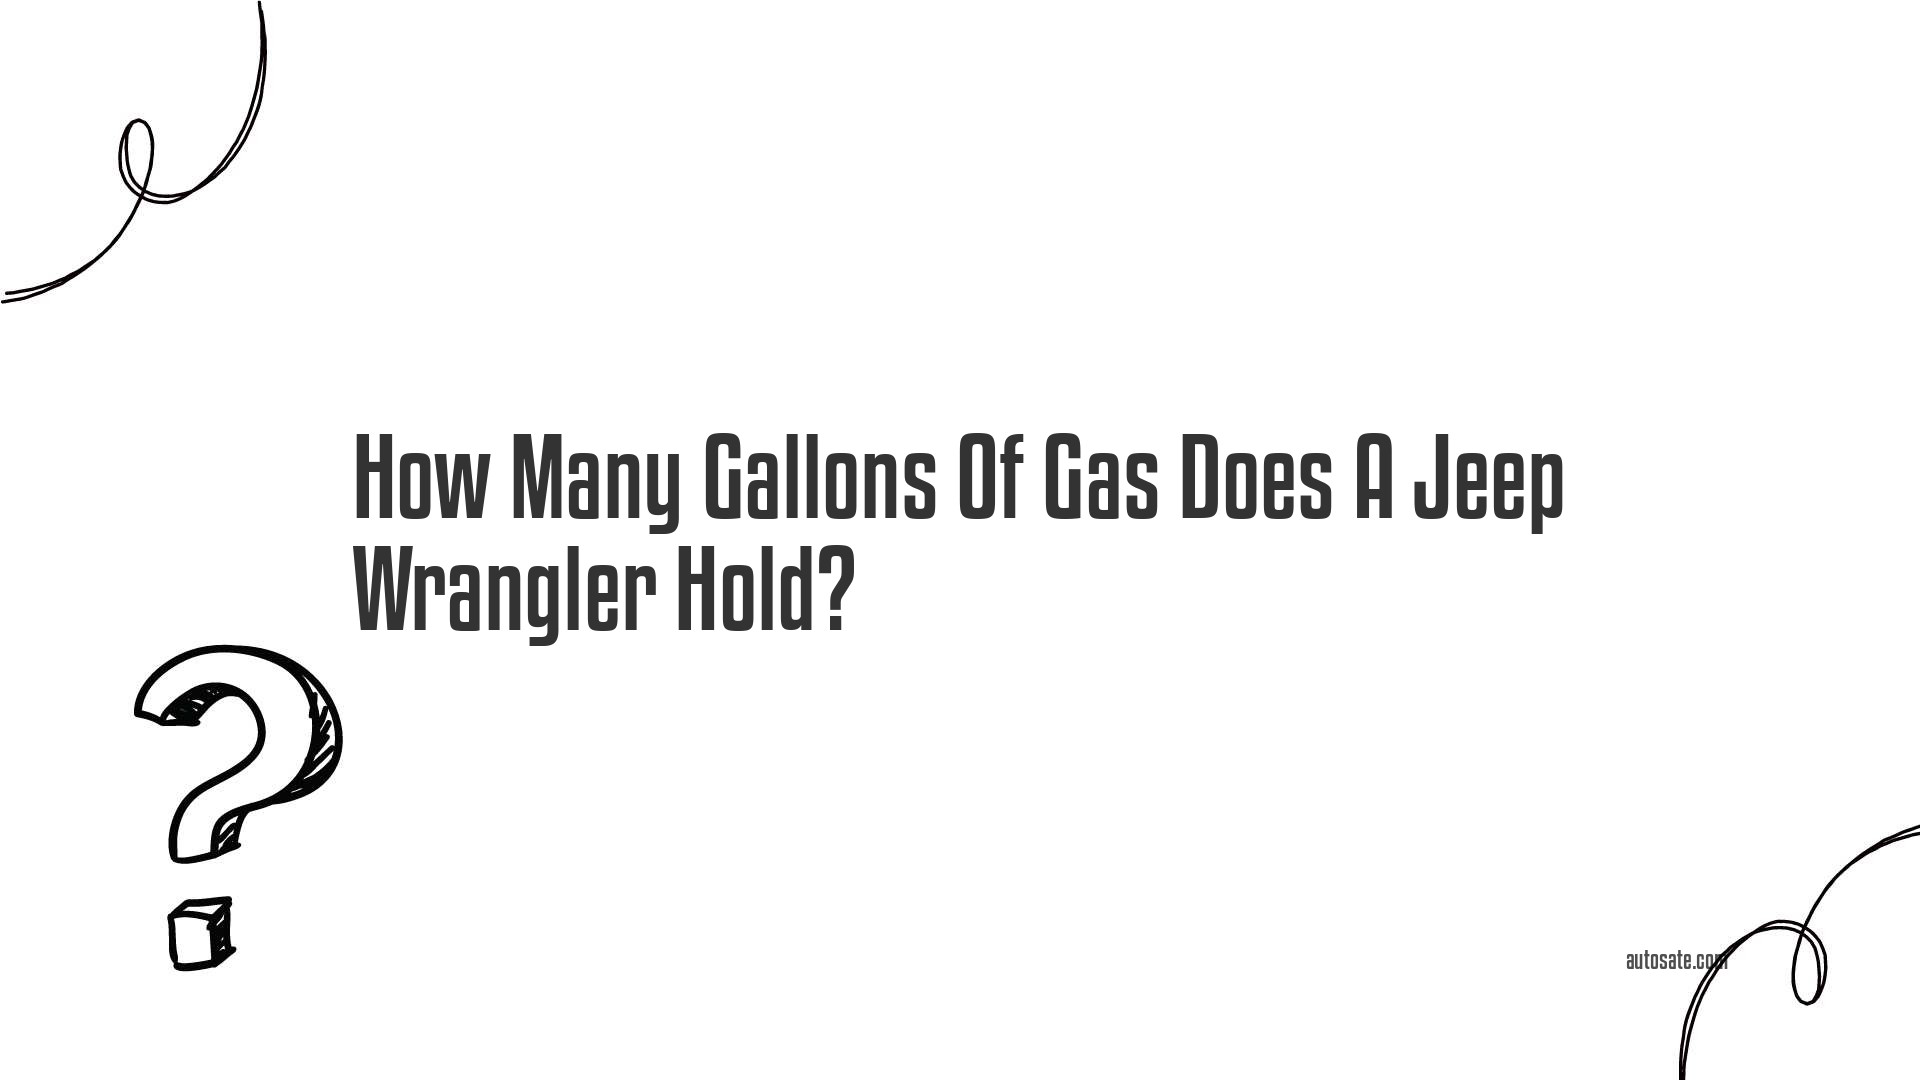 How Many Gallons Of Gas Does A Jeep Wrangler Hold?